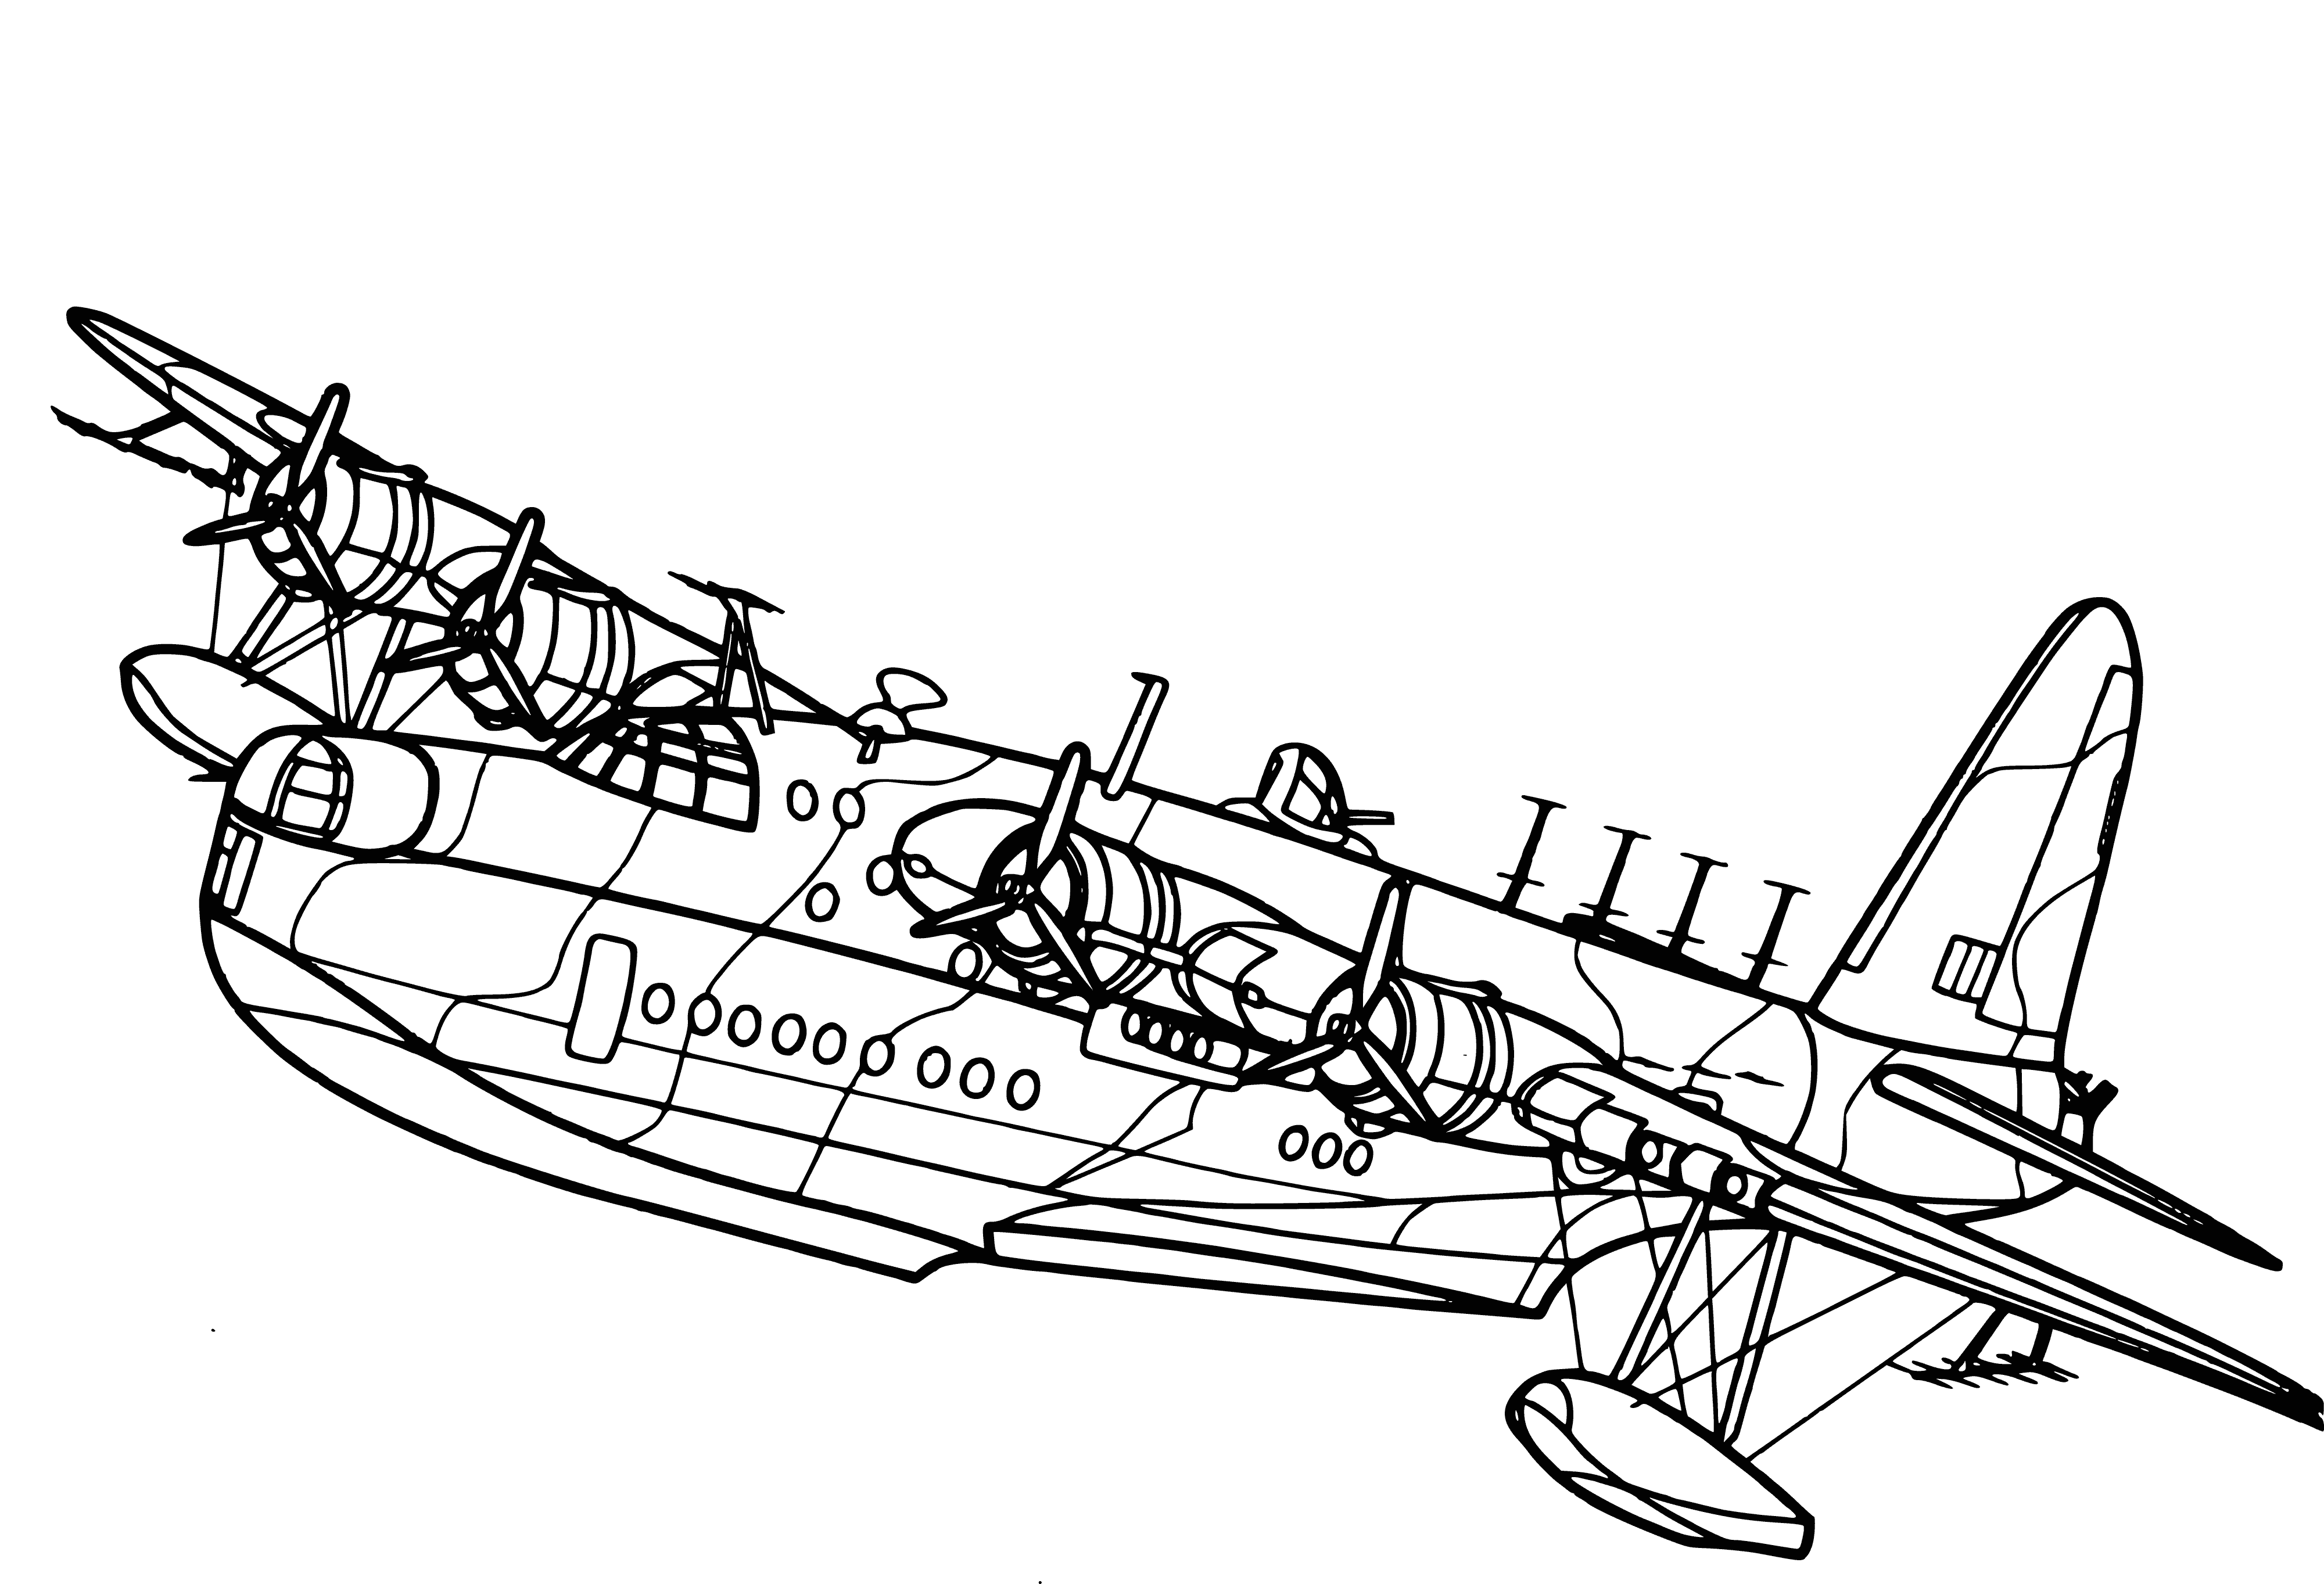 coloring page: Coloring page of a British Sunderland bomber with 4 engines, wings & tail with fin & rudder, plus 3 turrets & machine guns.